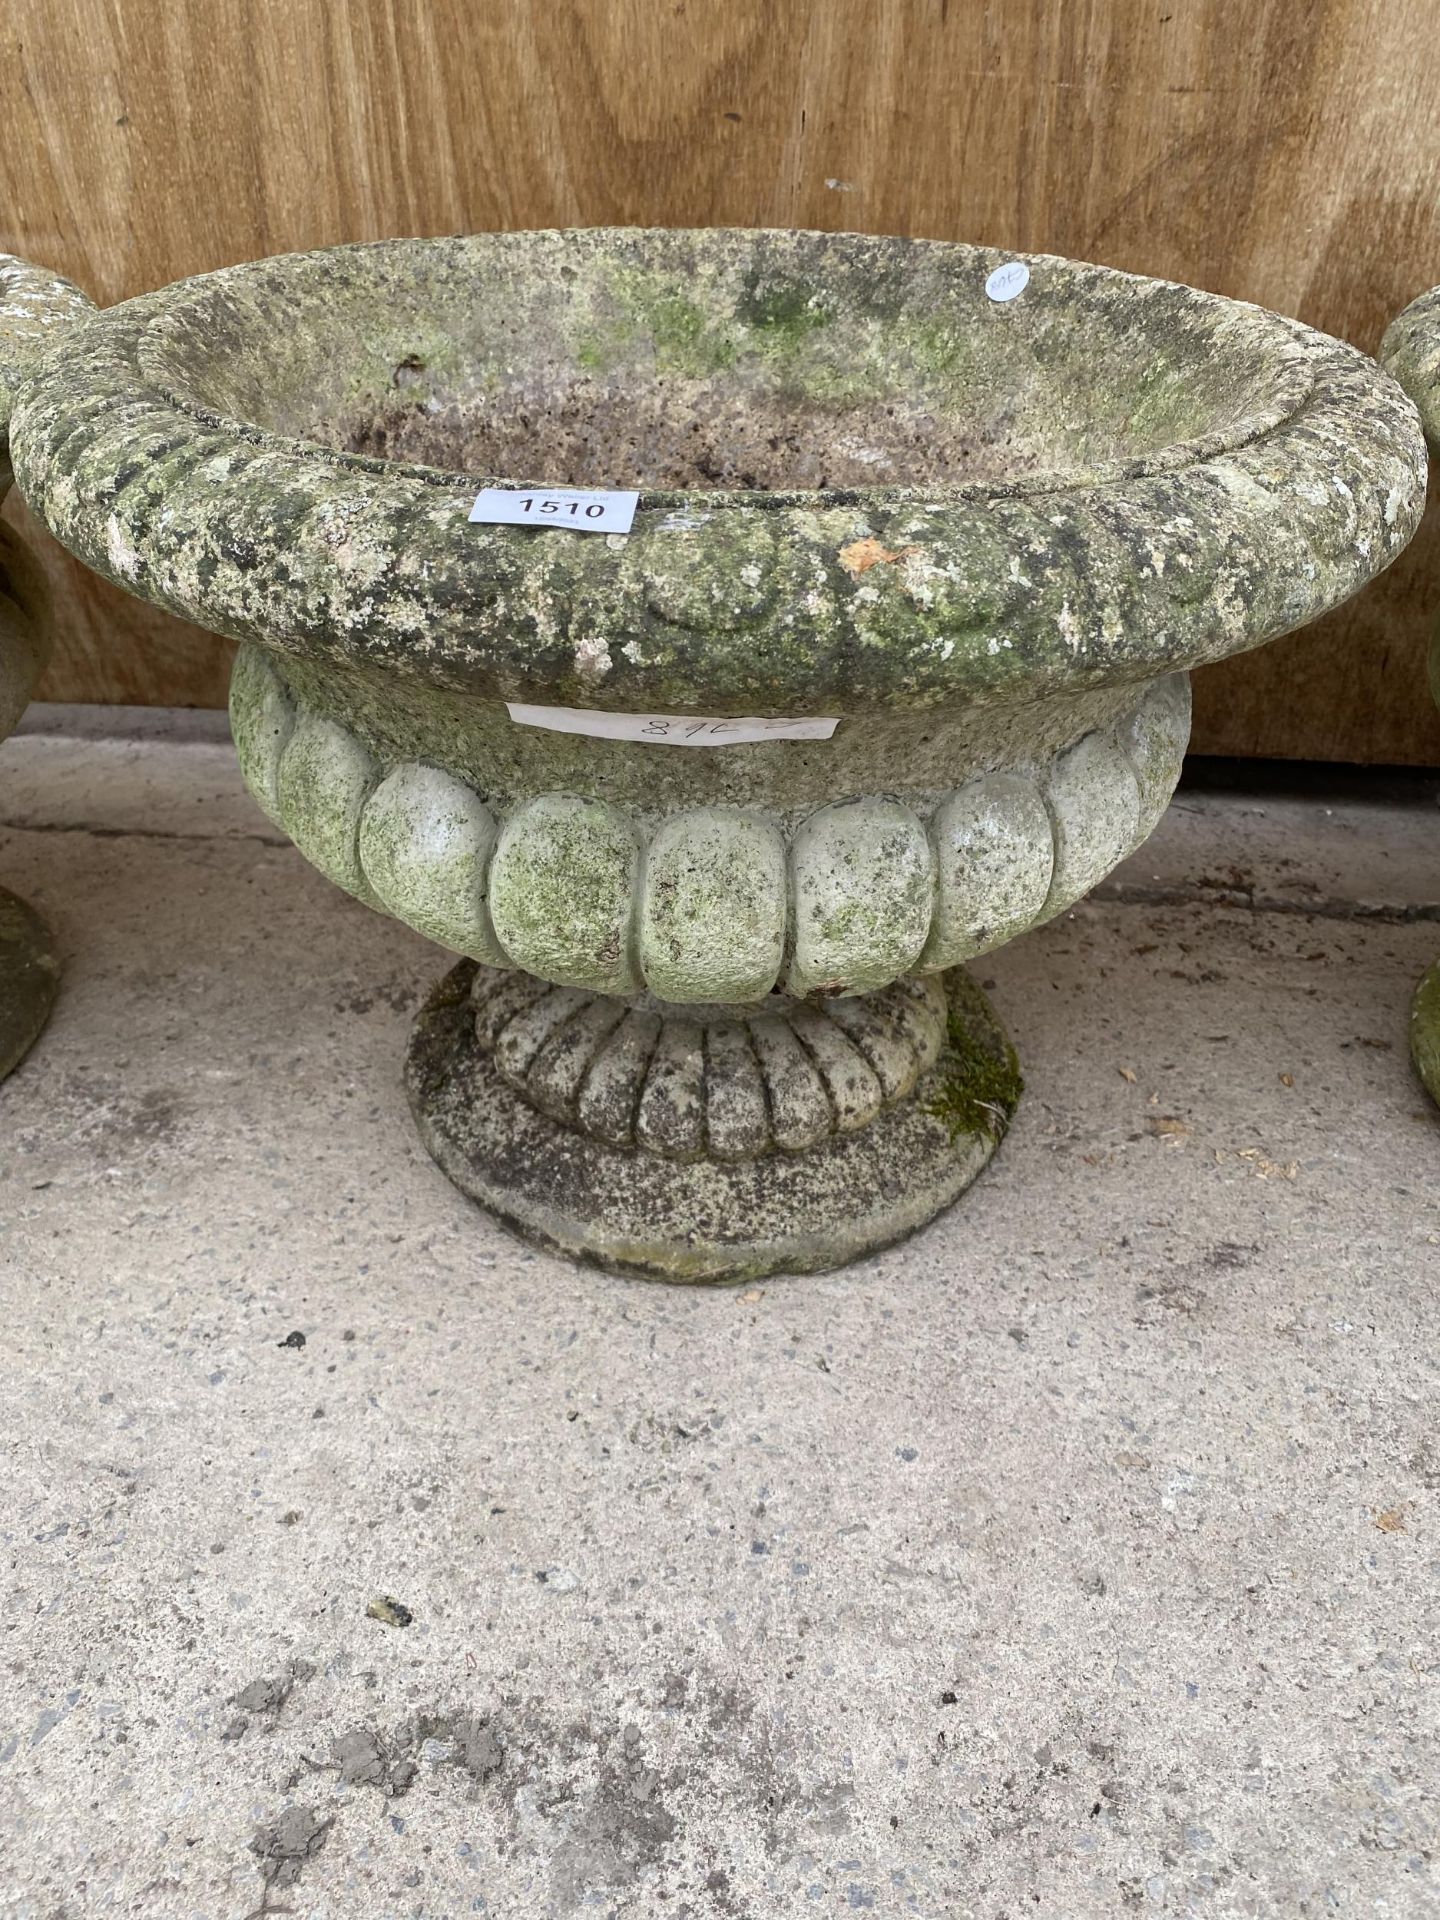 A RECONSTITUTED STONE URN STYLE PLANTER (H:34CM D:47CM)